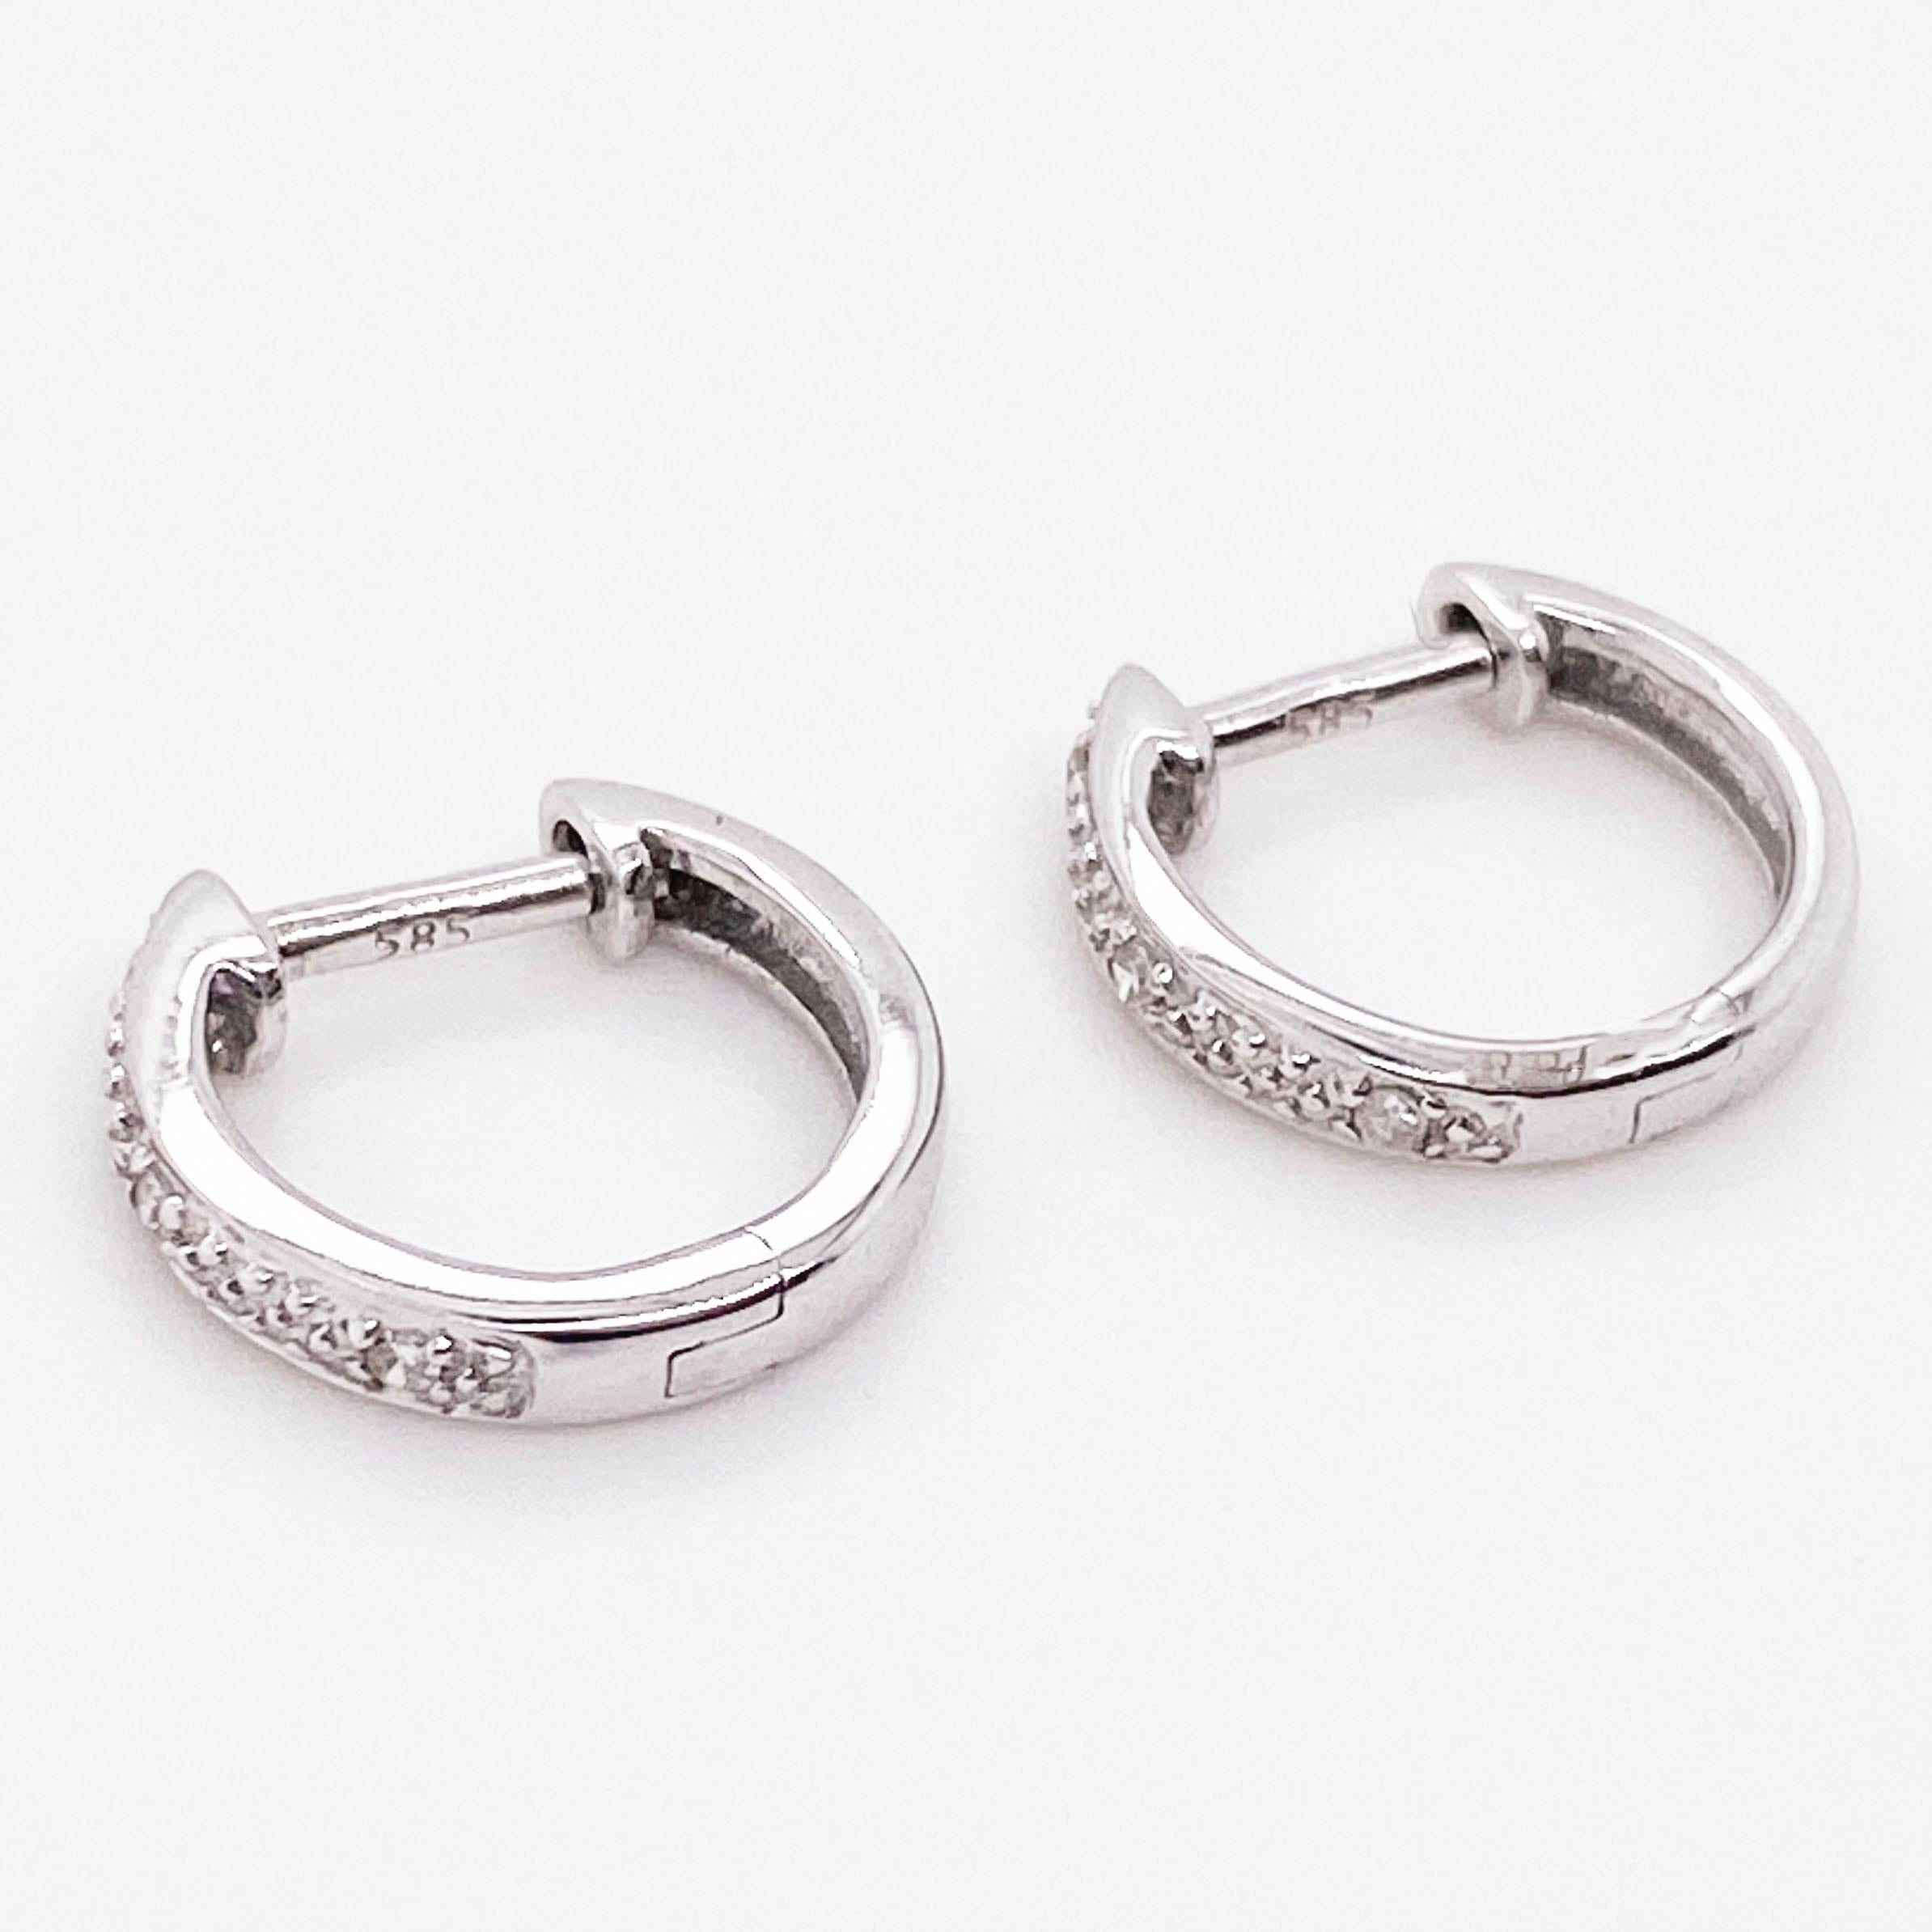 Diamond huggie earrings are in every fashion magazine, fine jewelry collection and all the rage! They are small, dainty, brilliant mini hoop earrings that are fabulous and so fun to wear. You can wear them daily for a casual look or dress up any